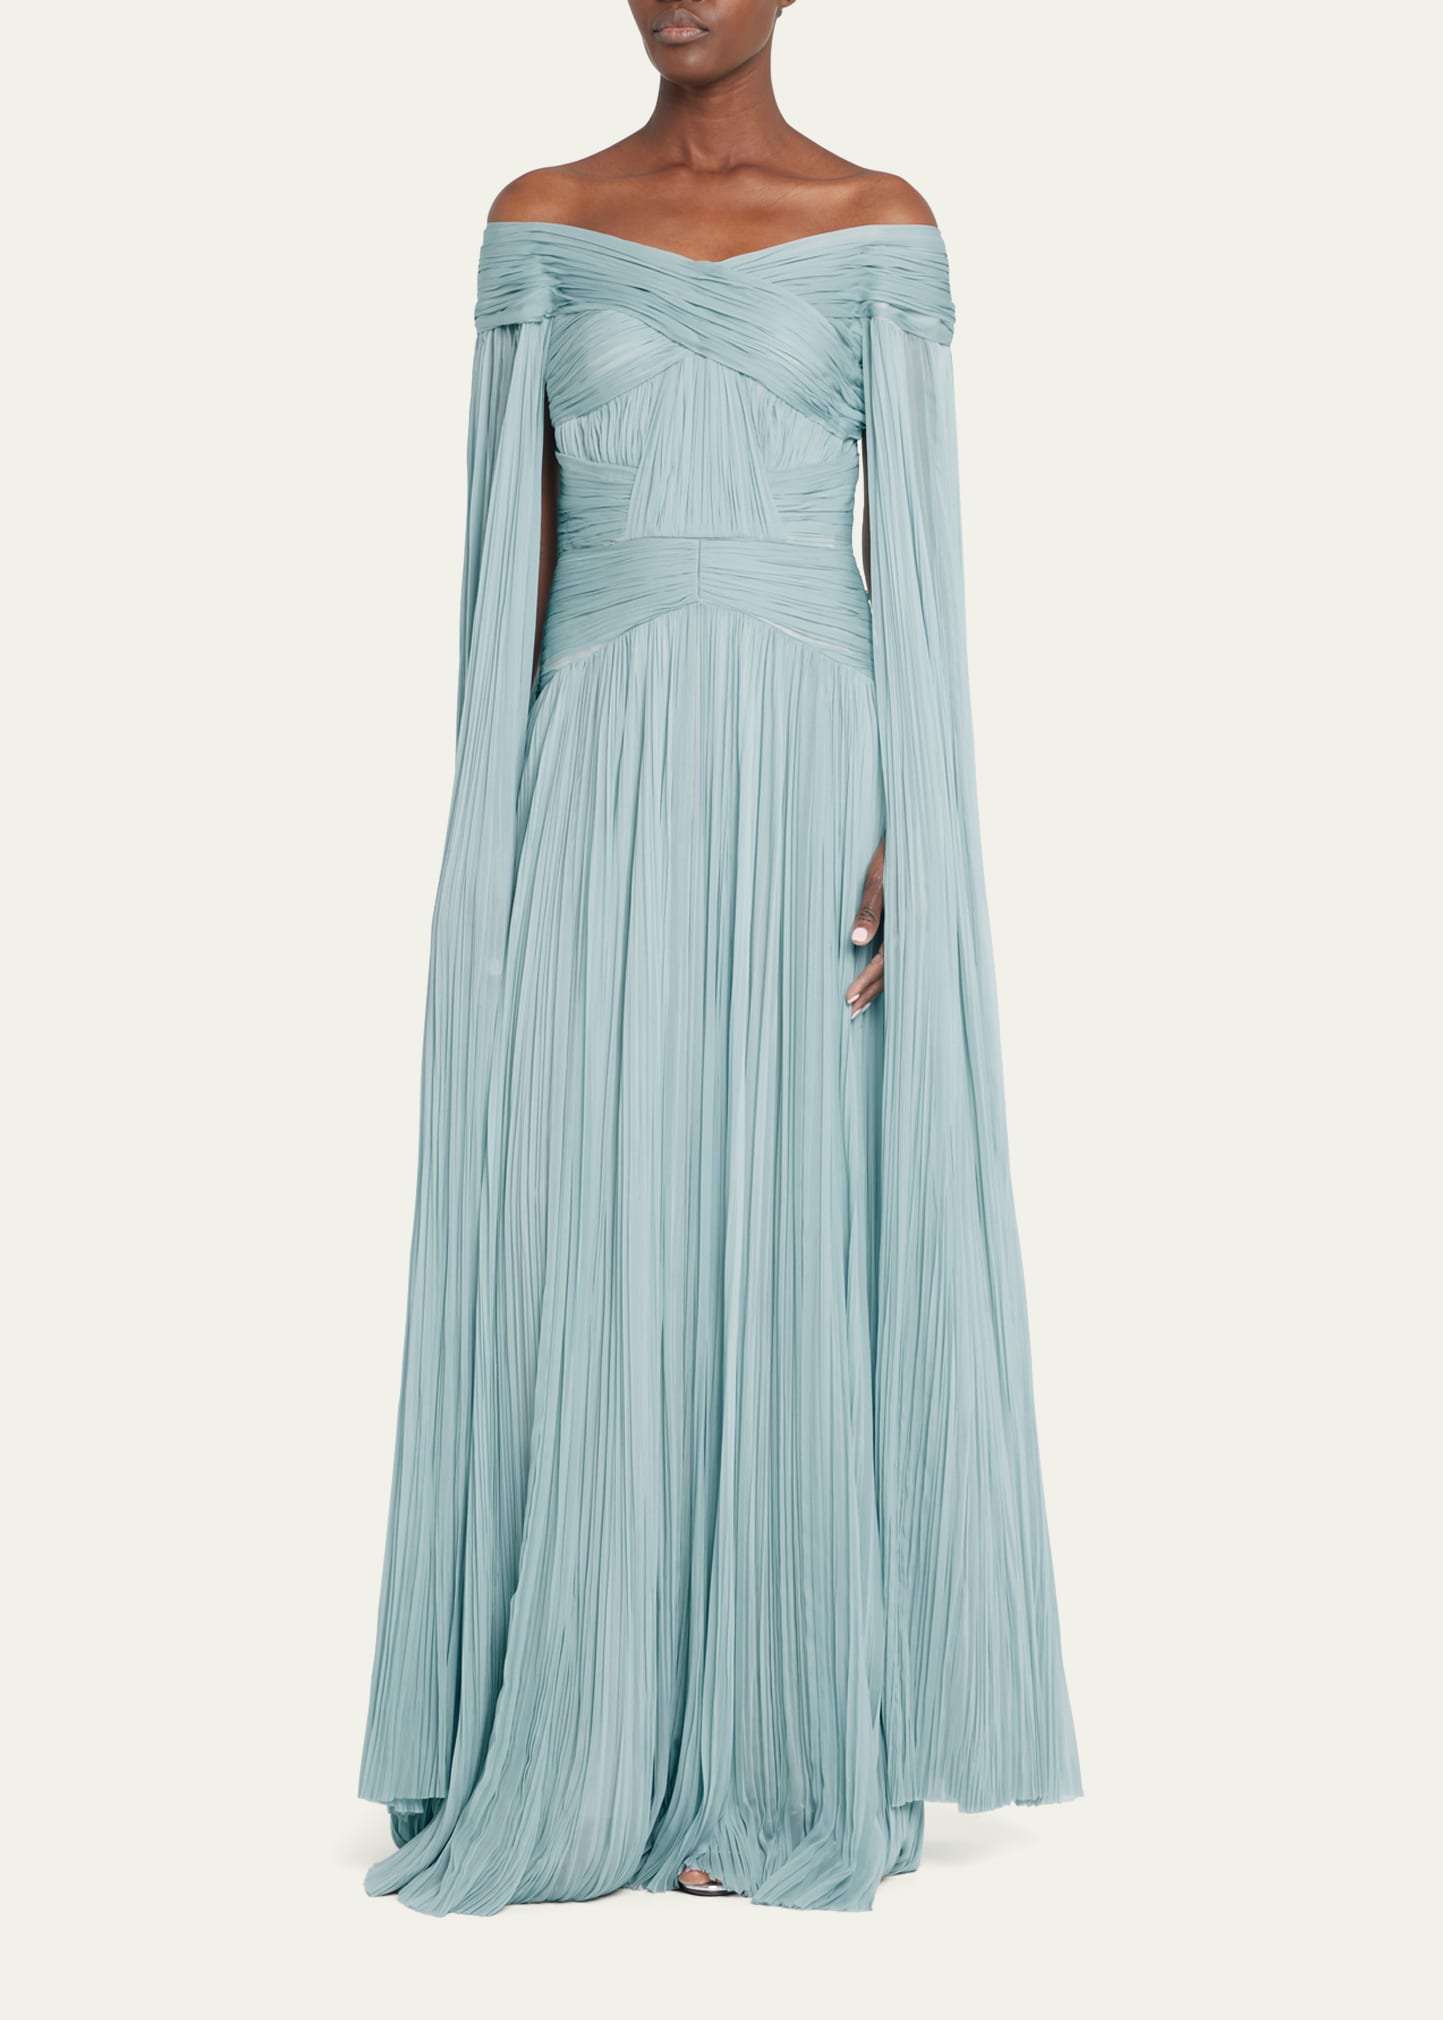 J. Mendel Cape Hand-Pleated Off-the-Shoulder Gown